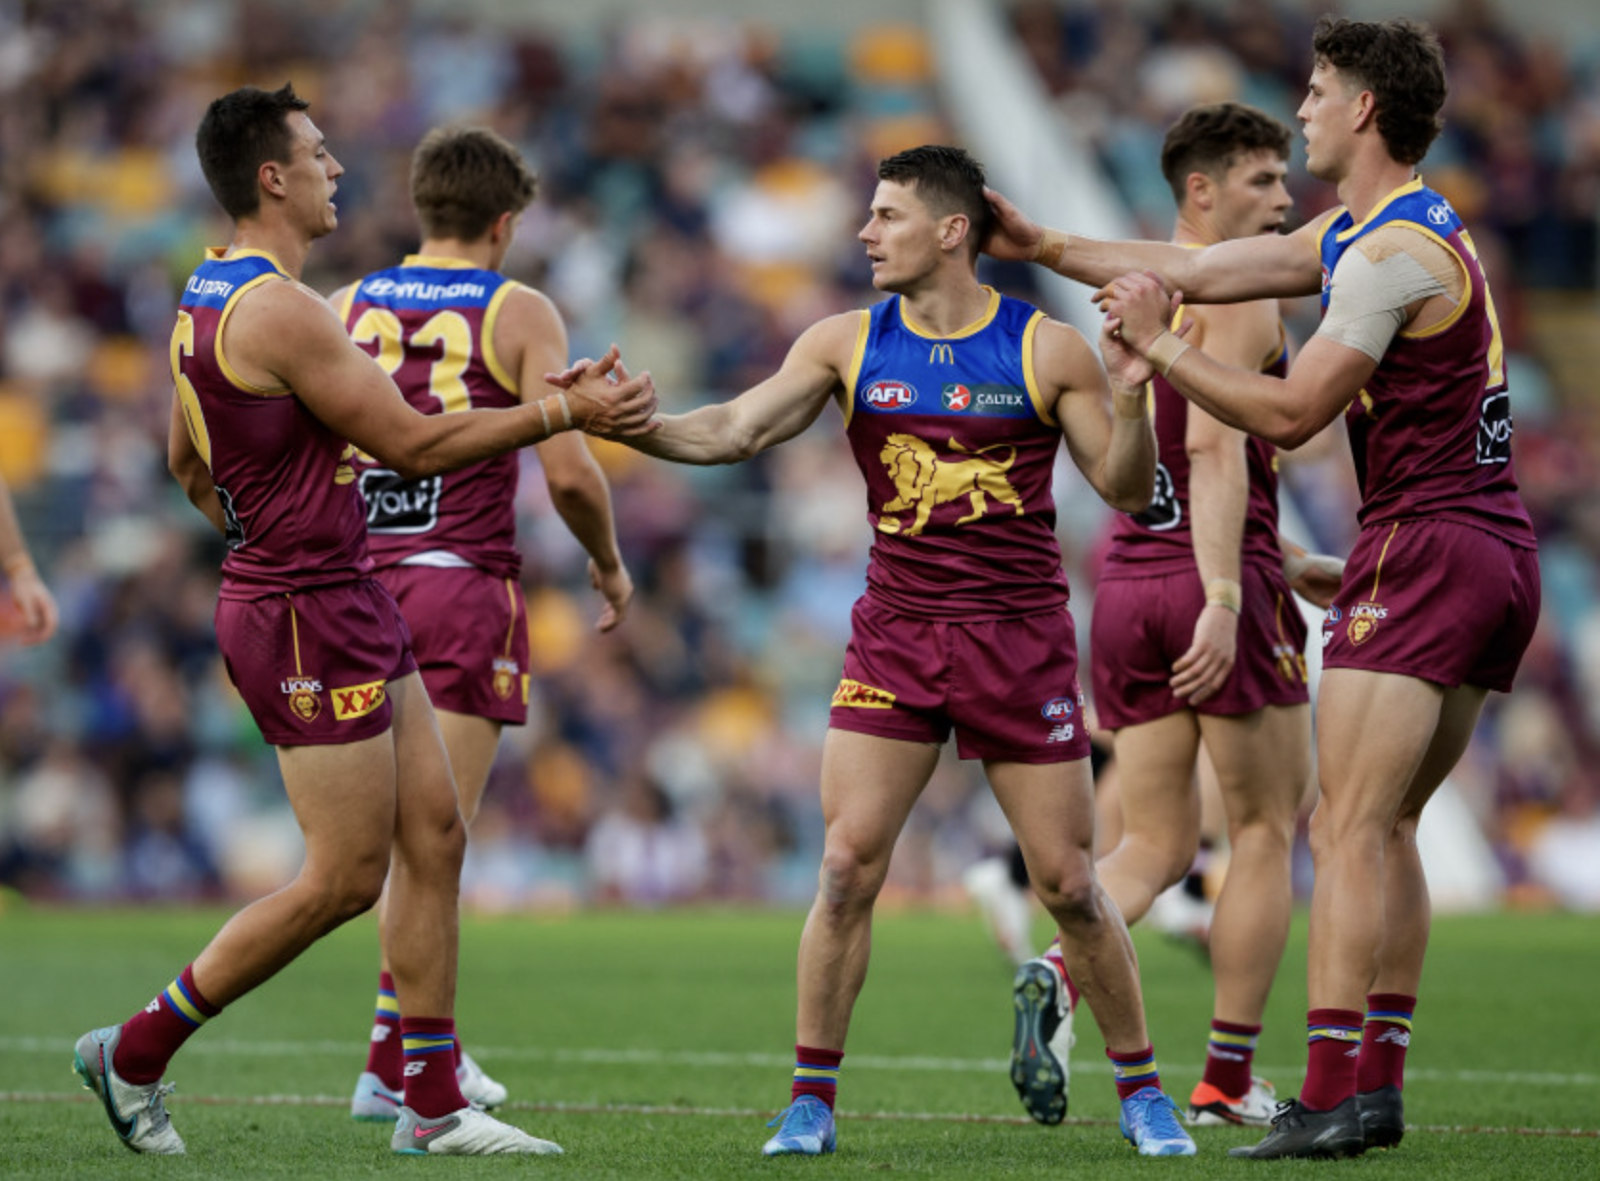 The Big Guide for the Ultimate Brisbane Lions Fan